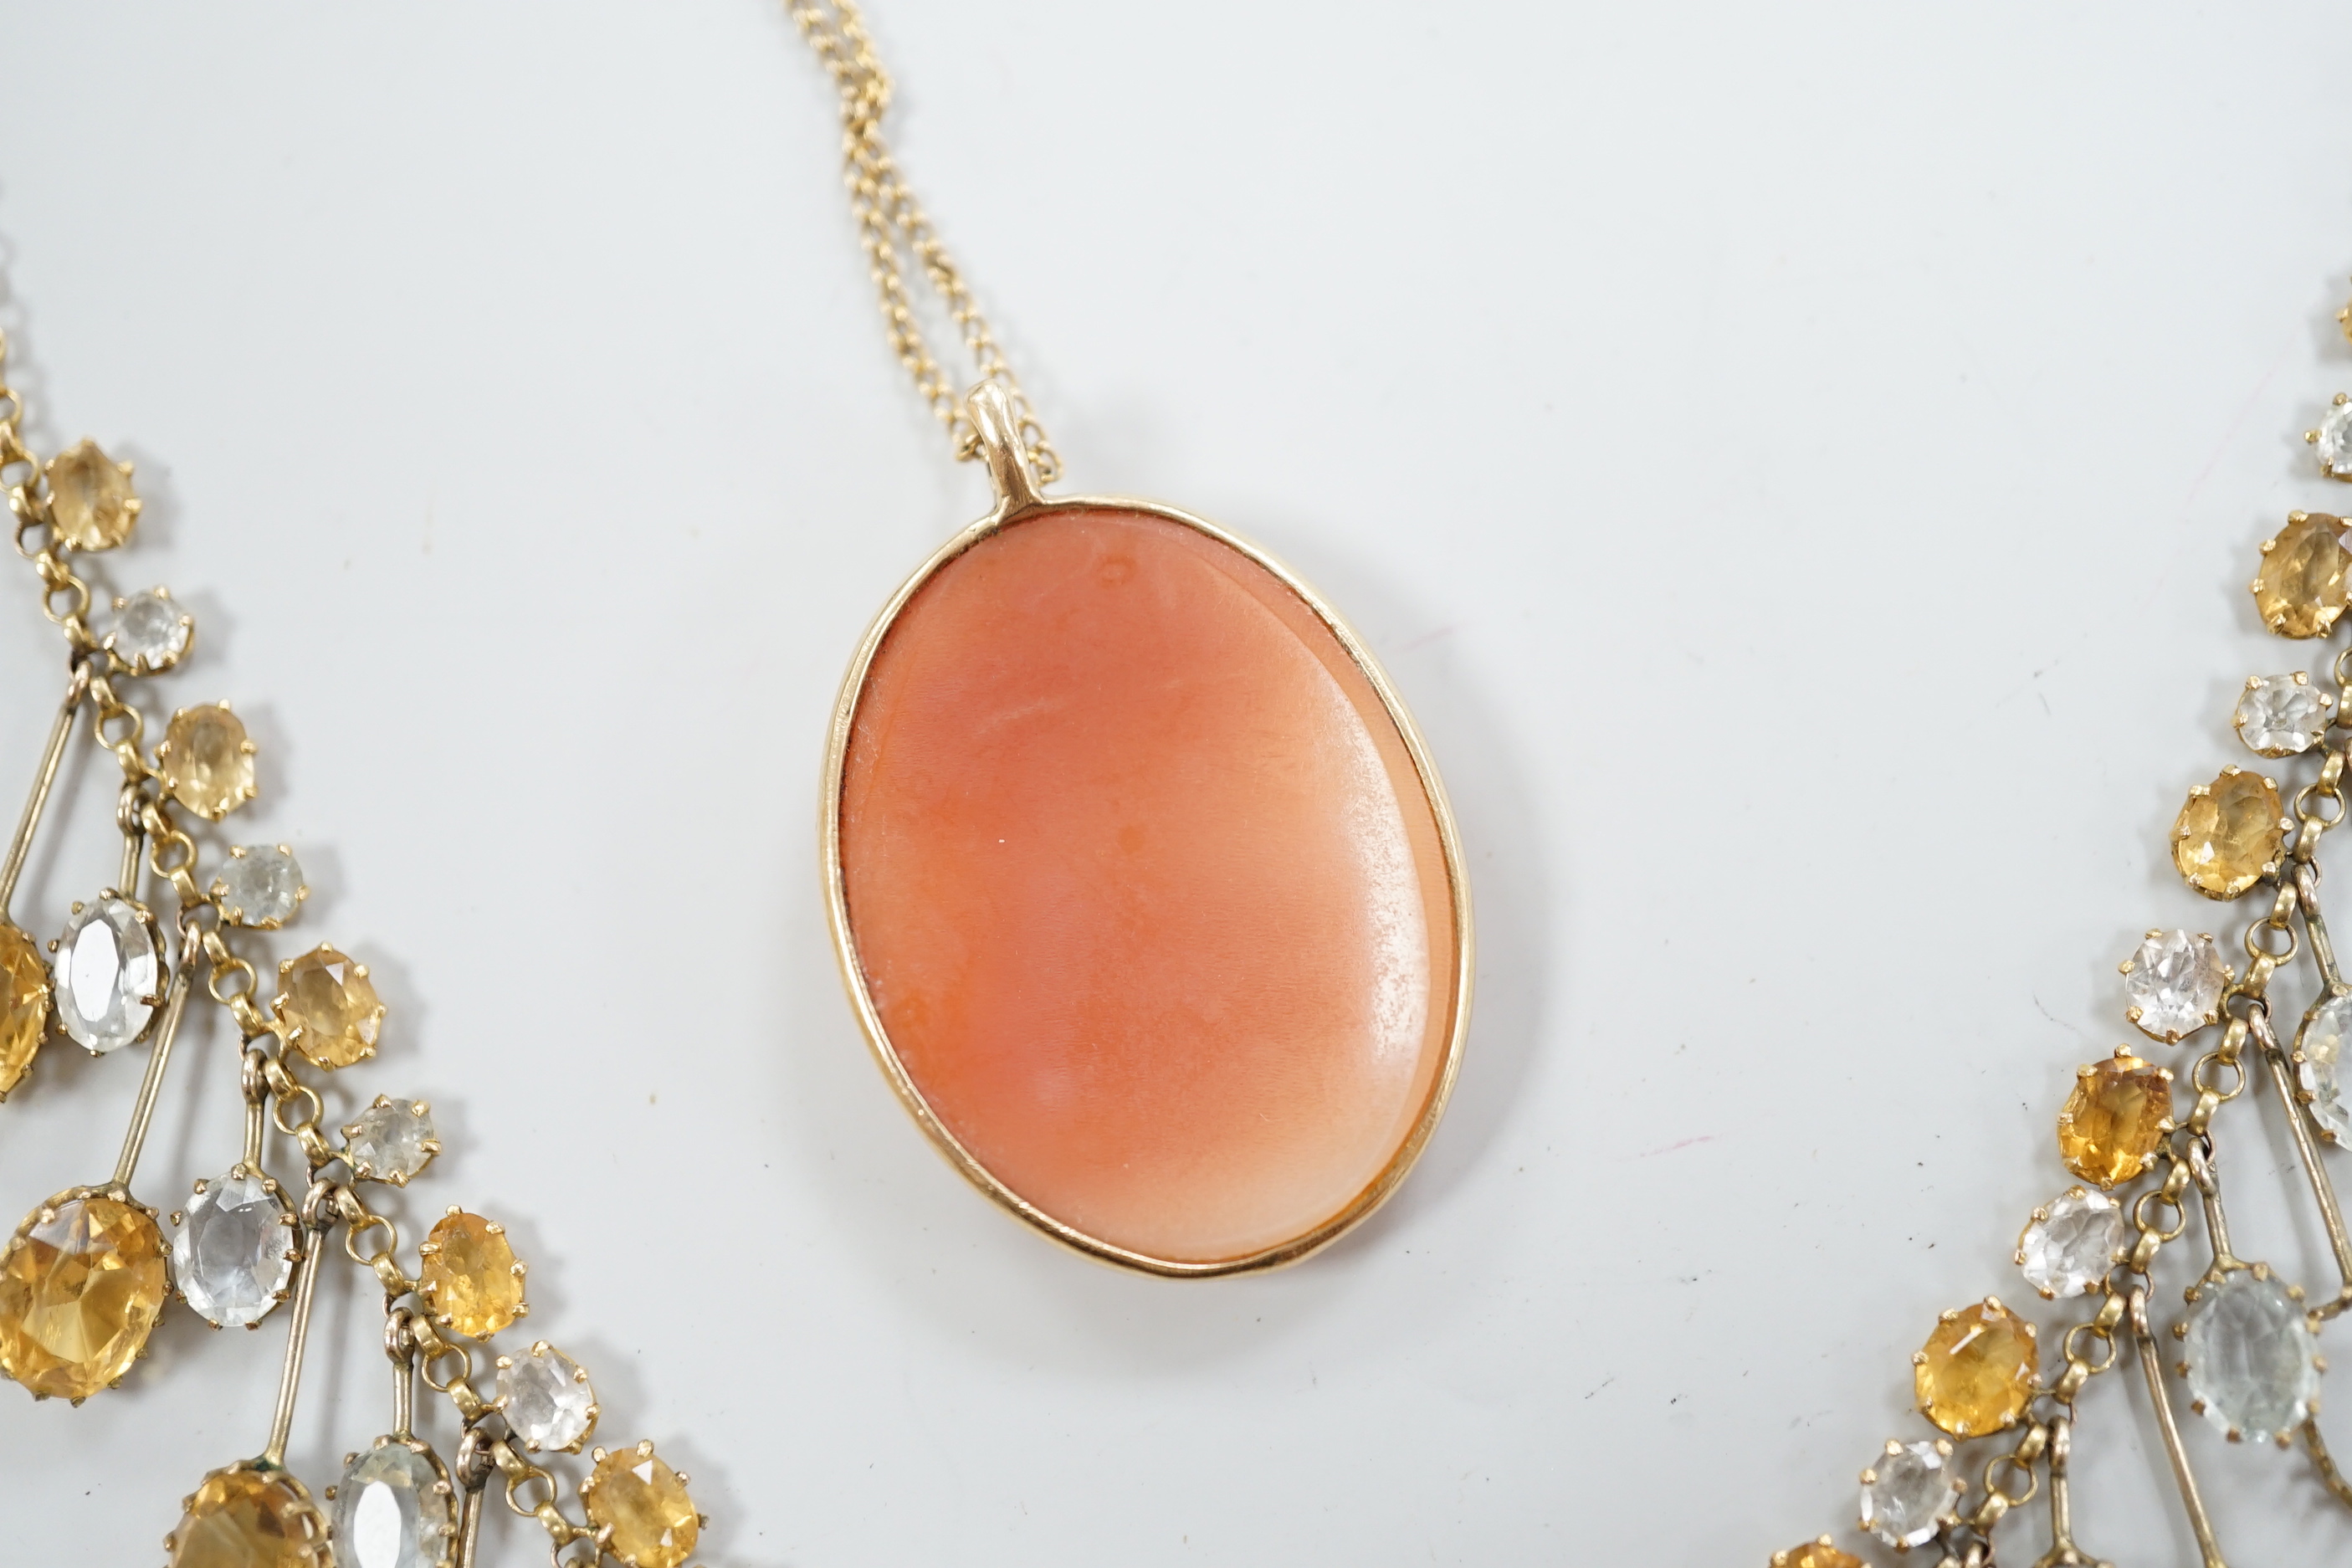 A yellow metal mounted oval cameo shell pendant, on a 9ct chain, together with a citrine and colourless beryl? set drop fringe necklace(a.f.).